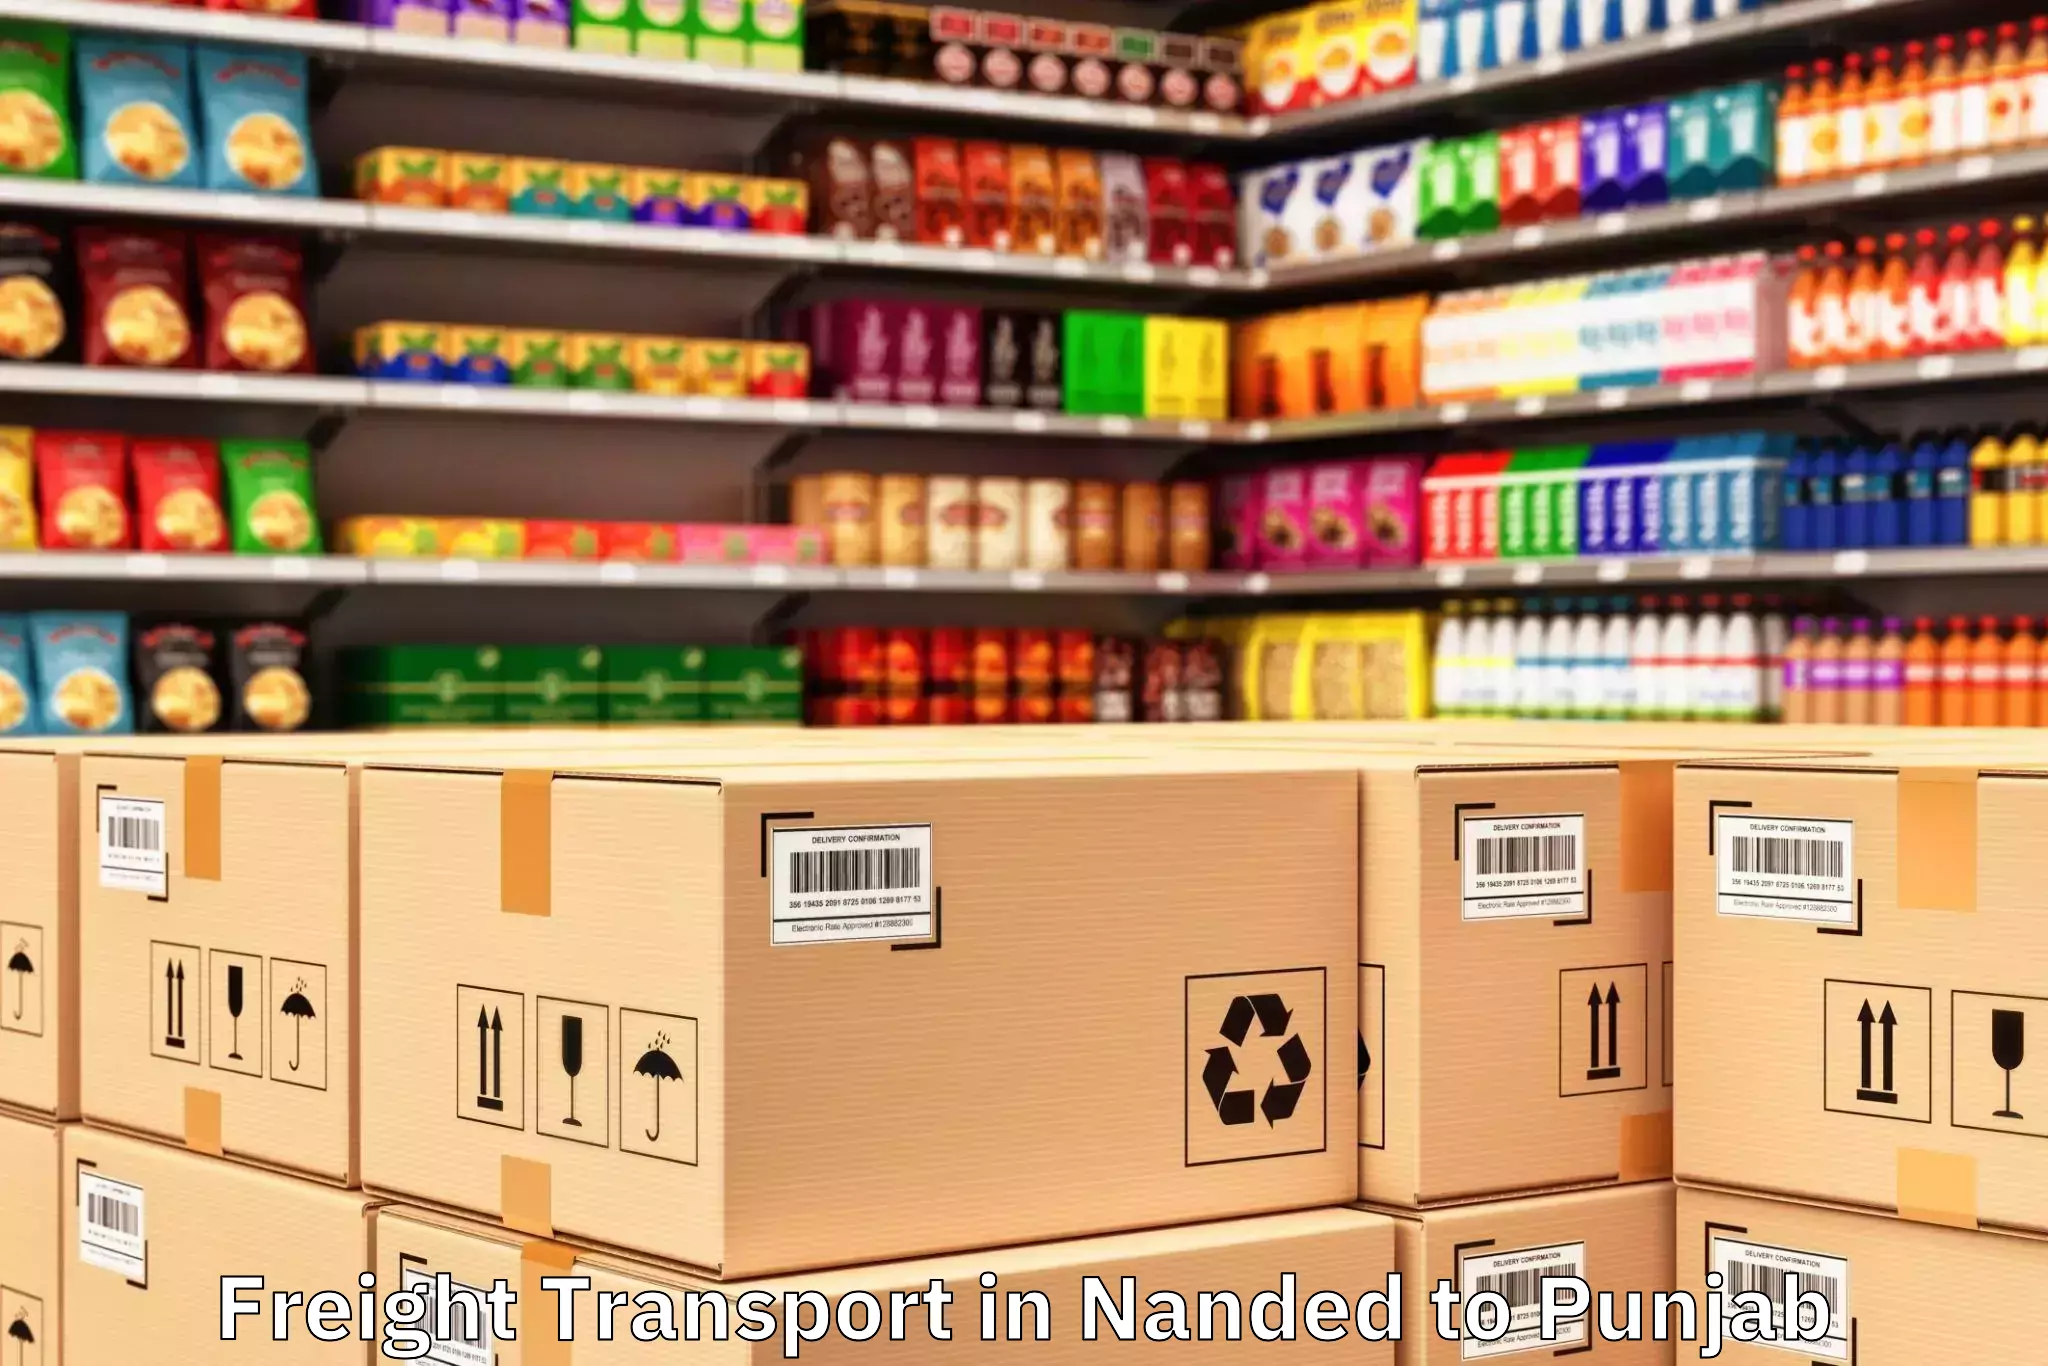 Hassle-Free Nanded to Soul Space Spirit Mall Freight Transport